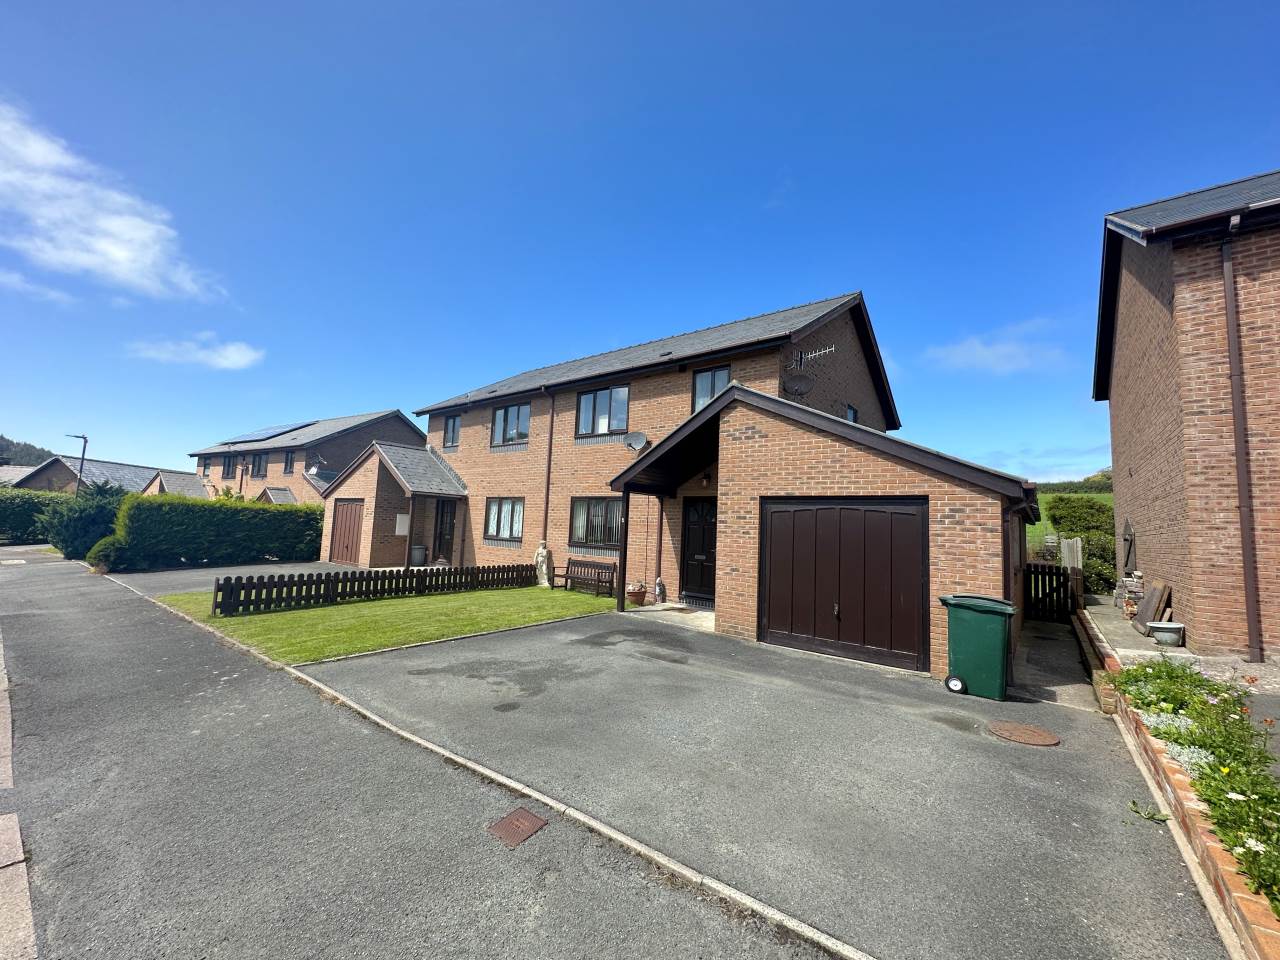 3 bed semi-detached house for sale in Bro Nantcellan, Clarach - Property Image 1